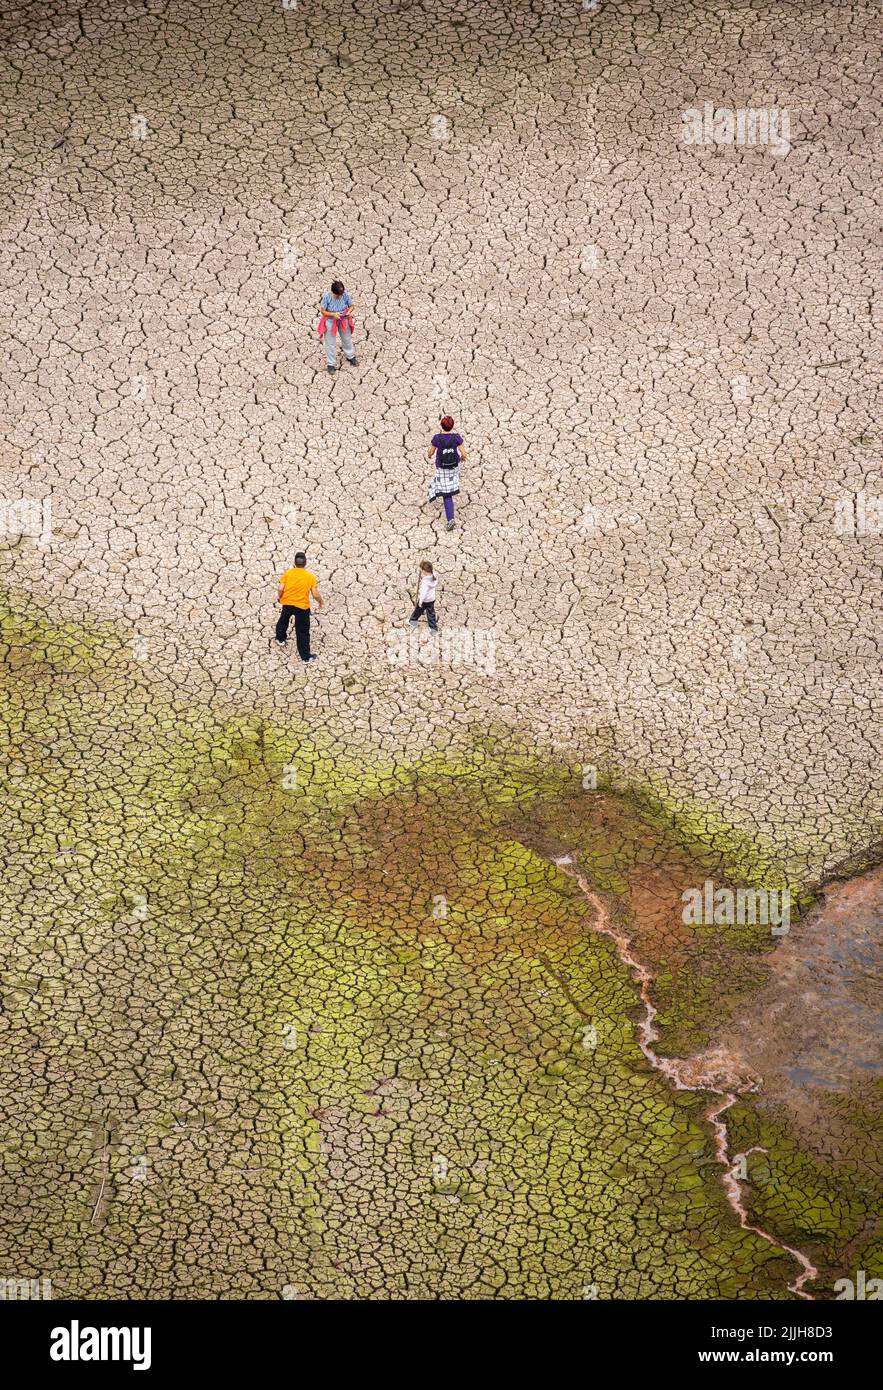 Family walking on cracked earth in empty reservoir, lake. Drought, global warming, climate crisis, water shortage, rising temperatures... Stock Photo